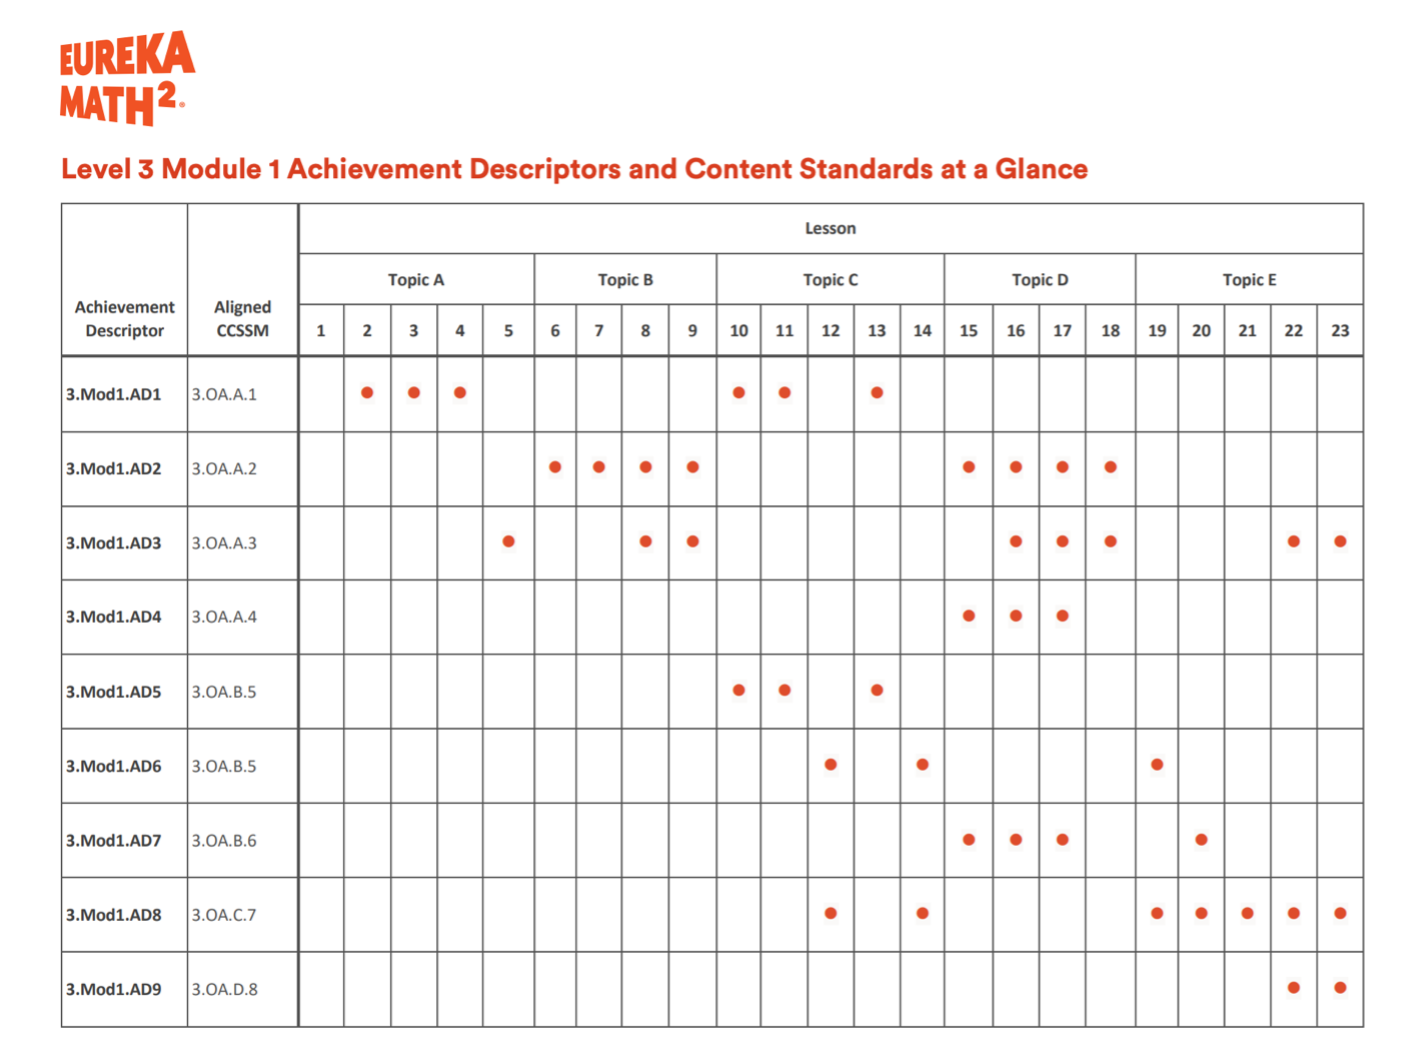 A table labeled Level 3 Module 1 Achievement Descriptors and Content Standards at a Glance, with lessons arranged in columns, and Achievement Descriptors and Aligned C C S S M arranged in rows. Lessons are marked with dots that correspond to Achievement Descriptors addressed in that lesson.